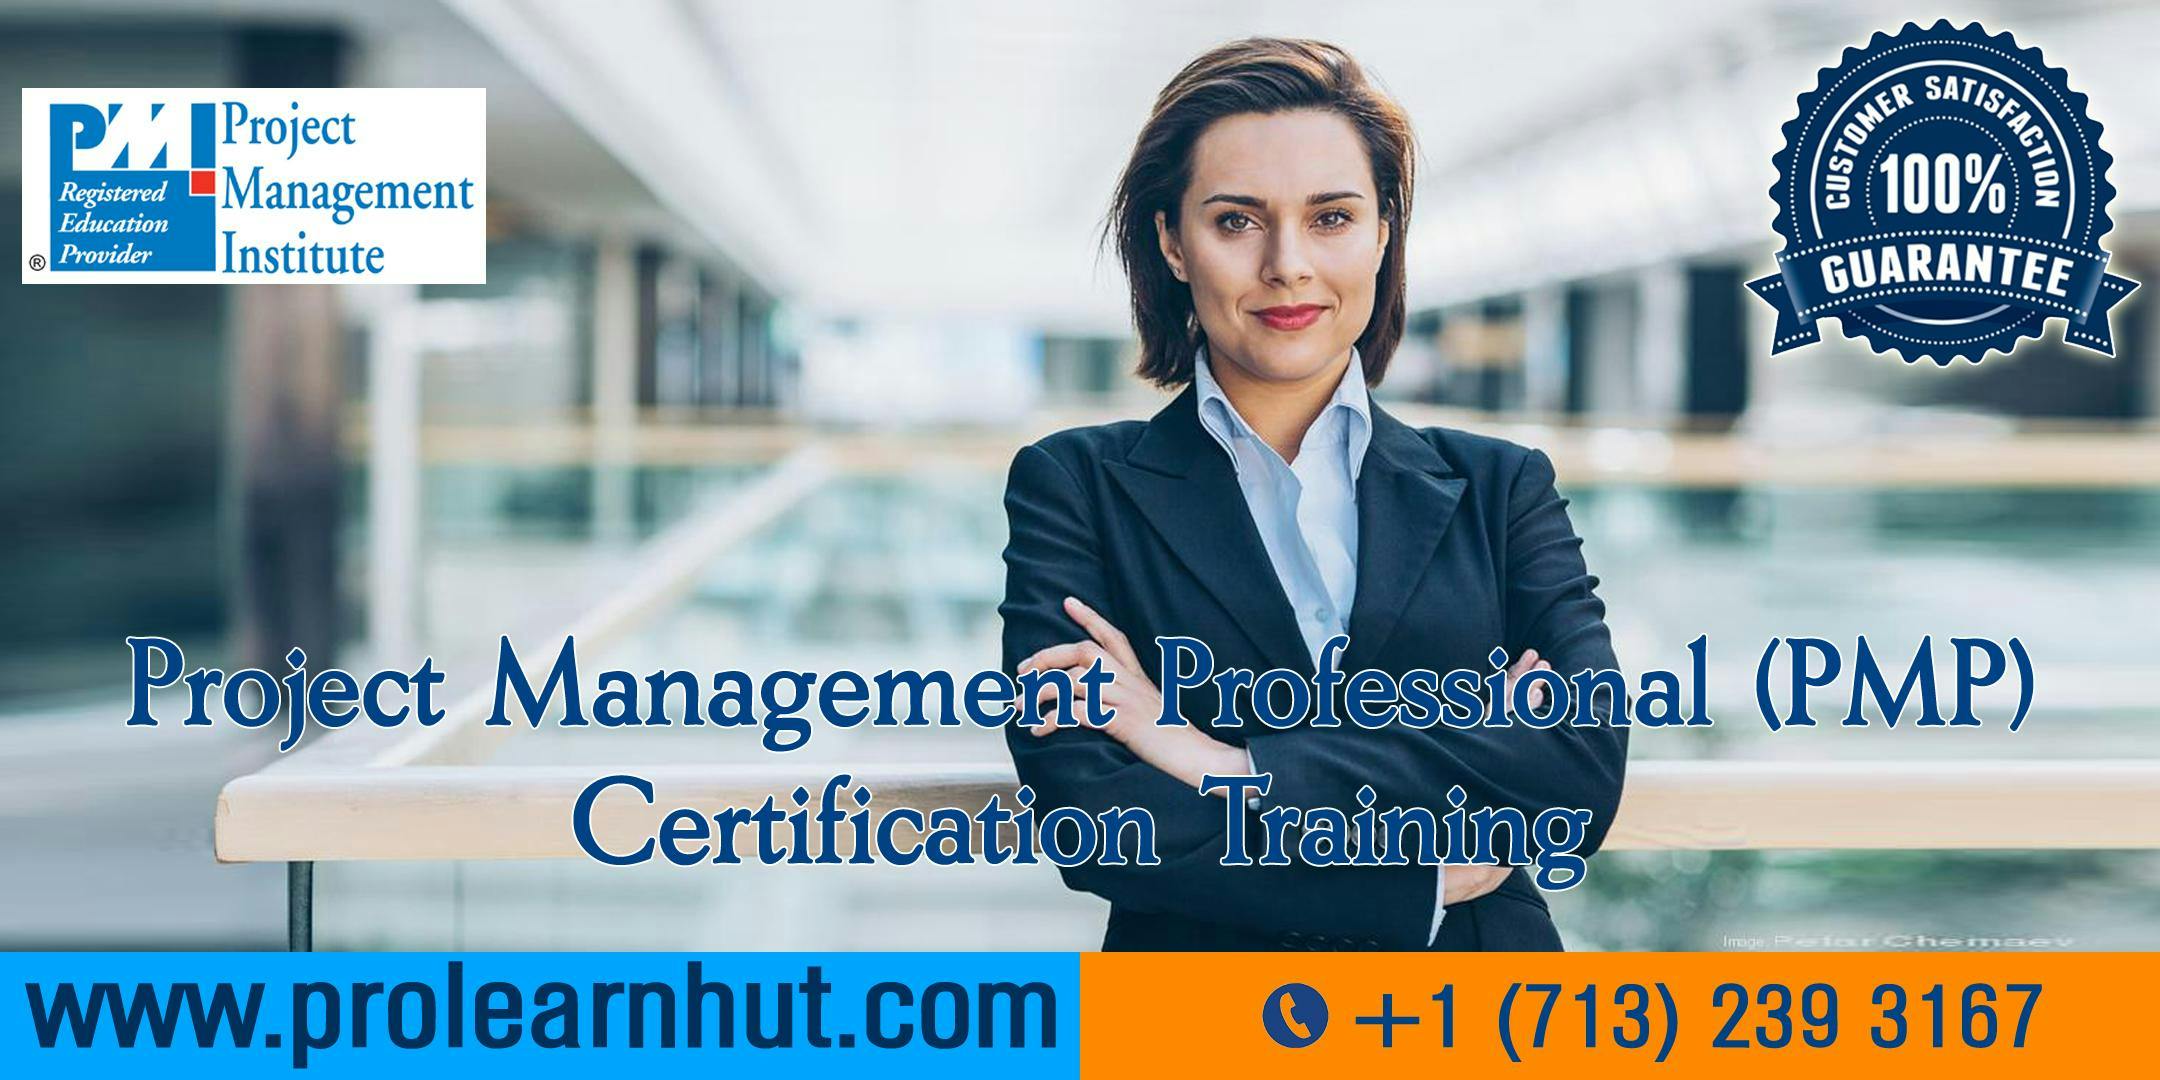 PMP Certification | Project Management Certification| PMP Training in Rancho Cucamonga, CA | ProLearnHut